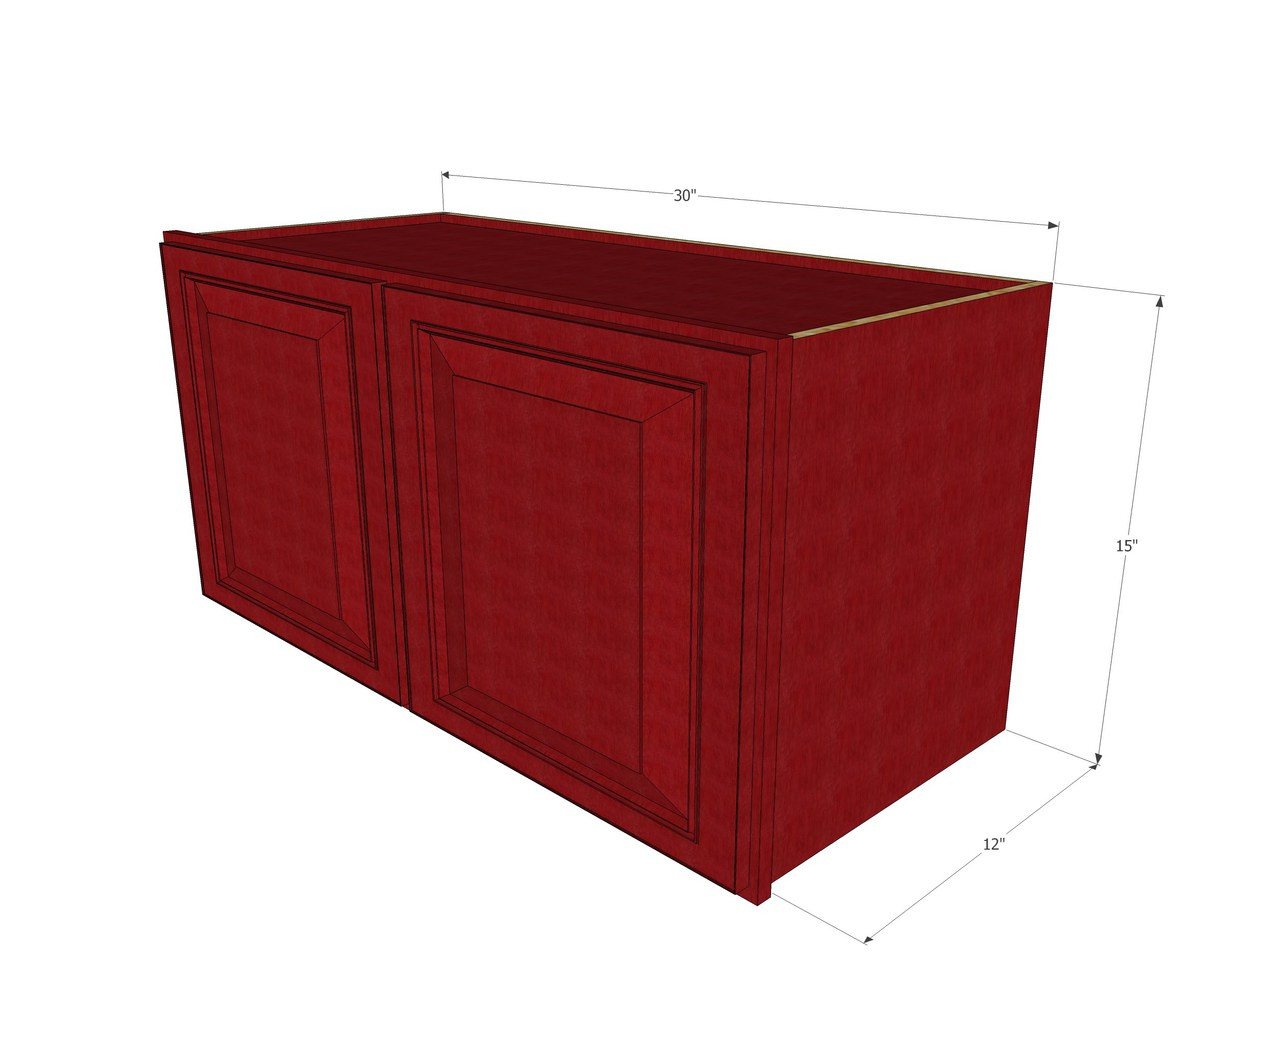 15 inch high kitchen wall cabinet